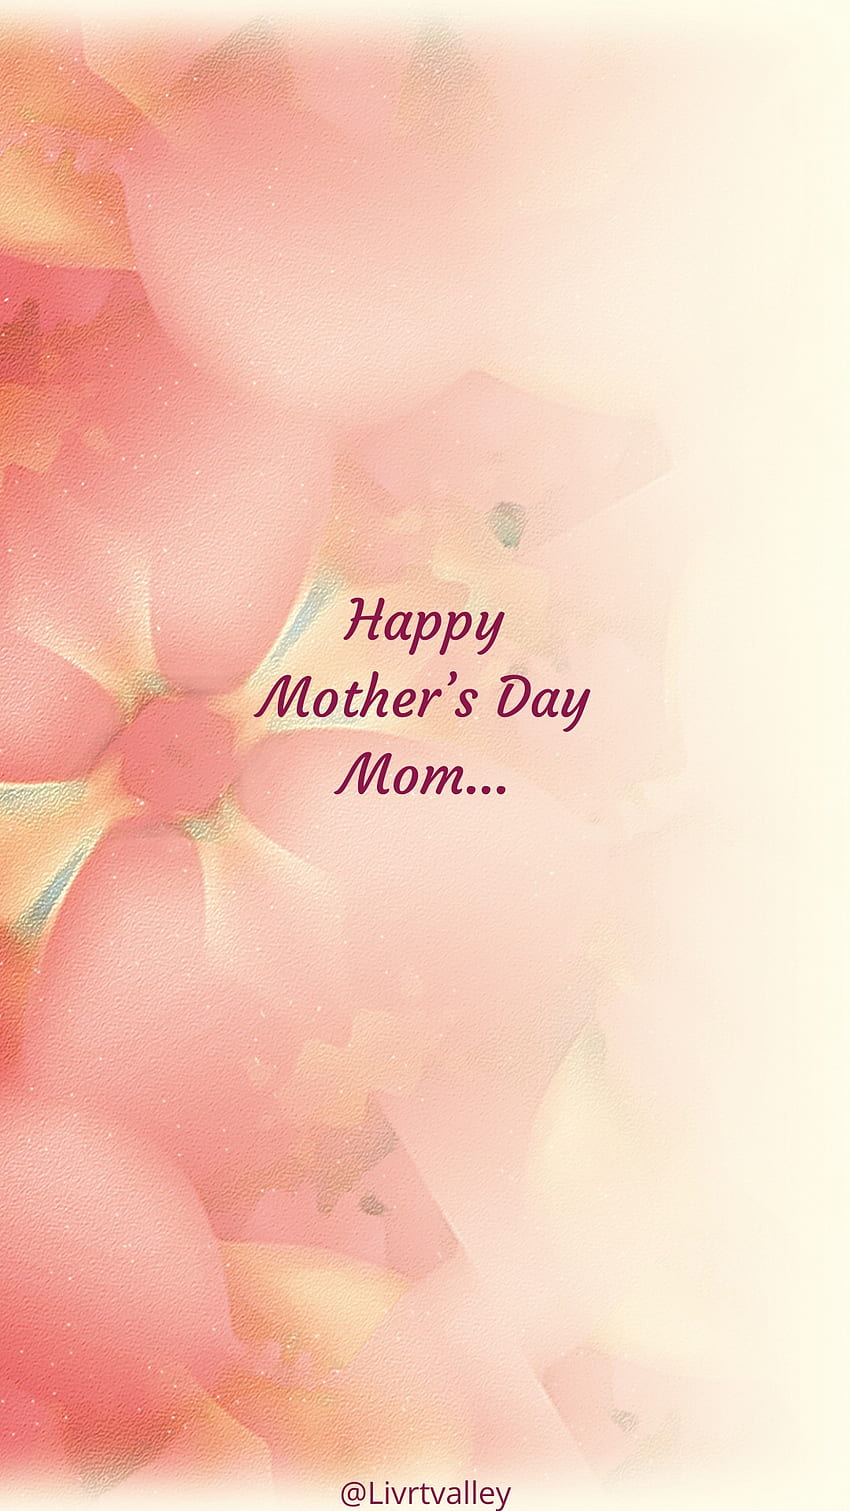 Mother’s Day, sweetmom, mother, merimaa, mymom, mom, happymothersday, loveyoumom, mothersday, nani HD phone wallpaper